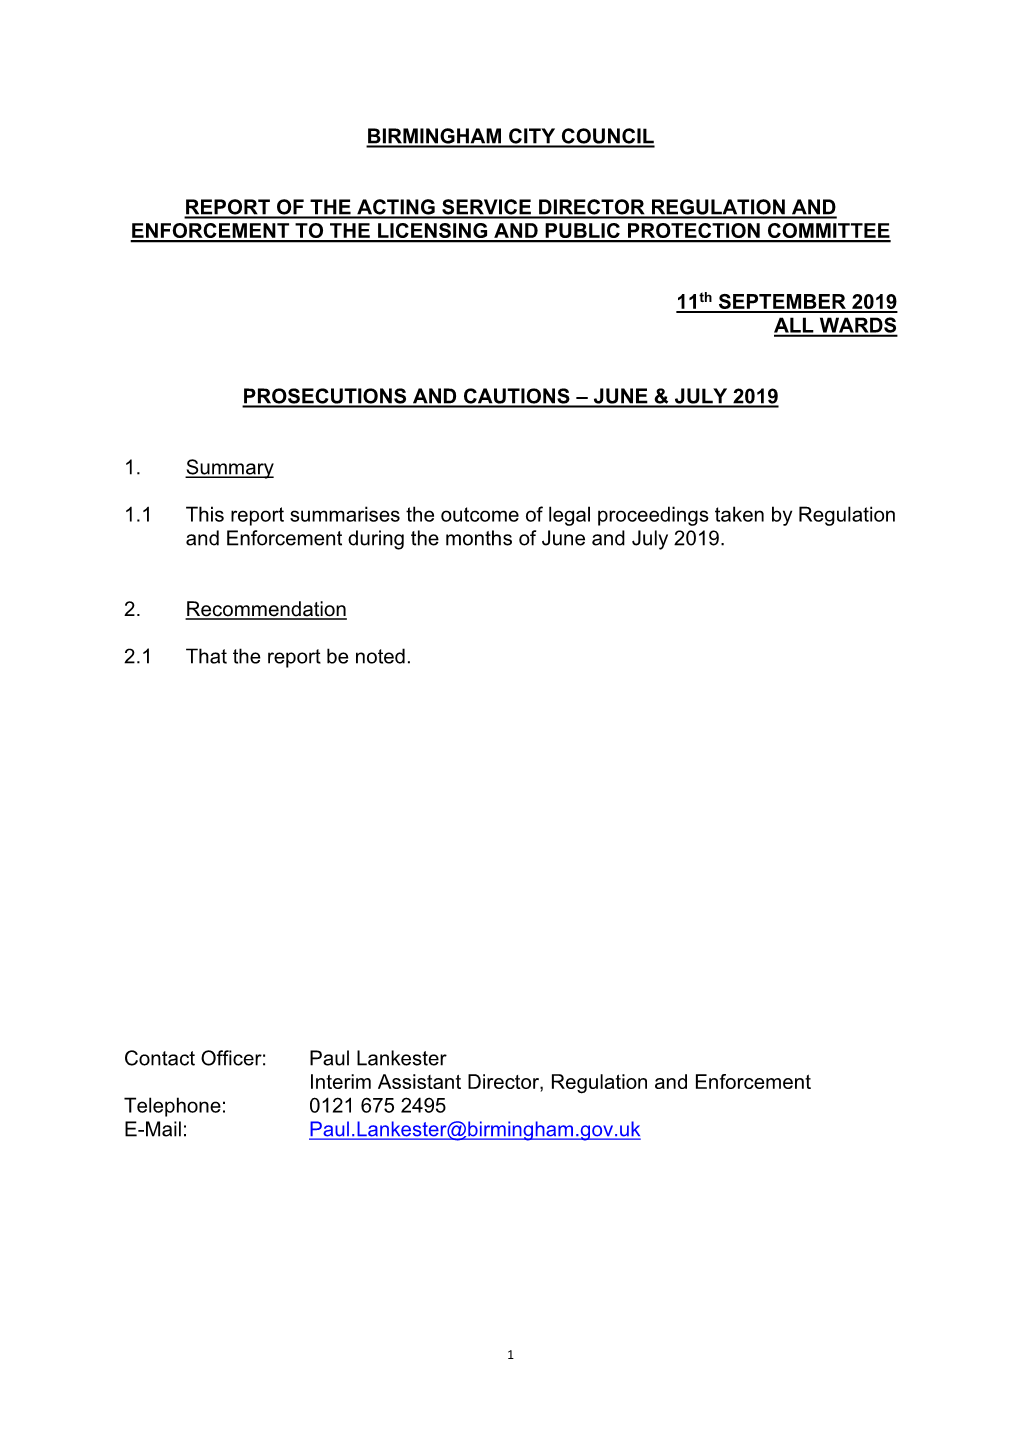 Birmingham City Council Report of the Acting